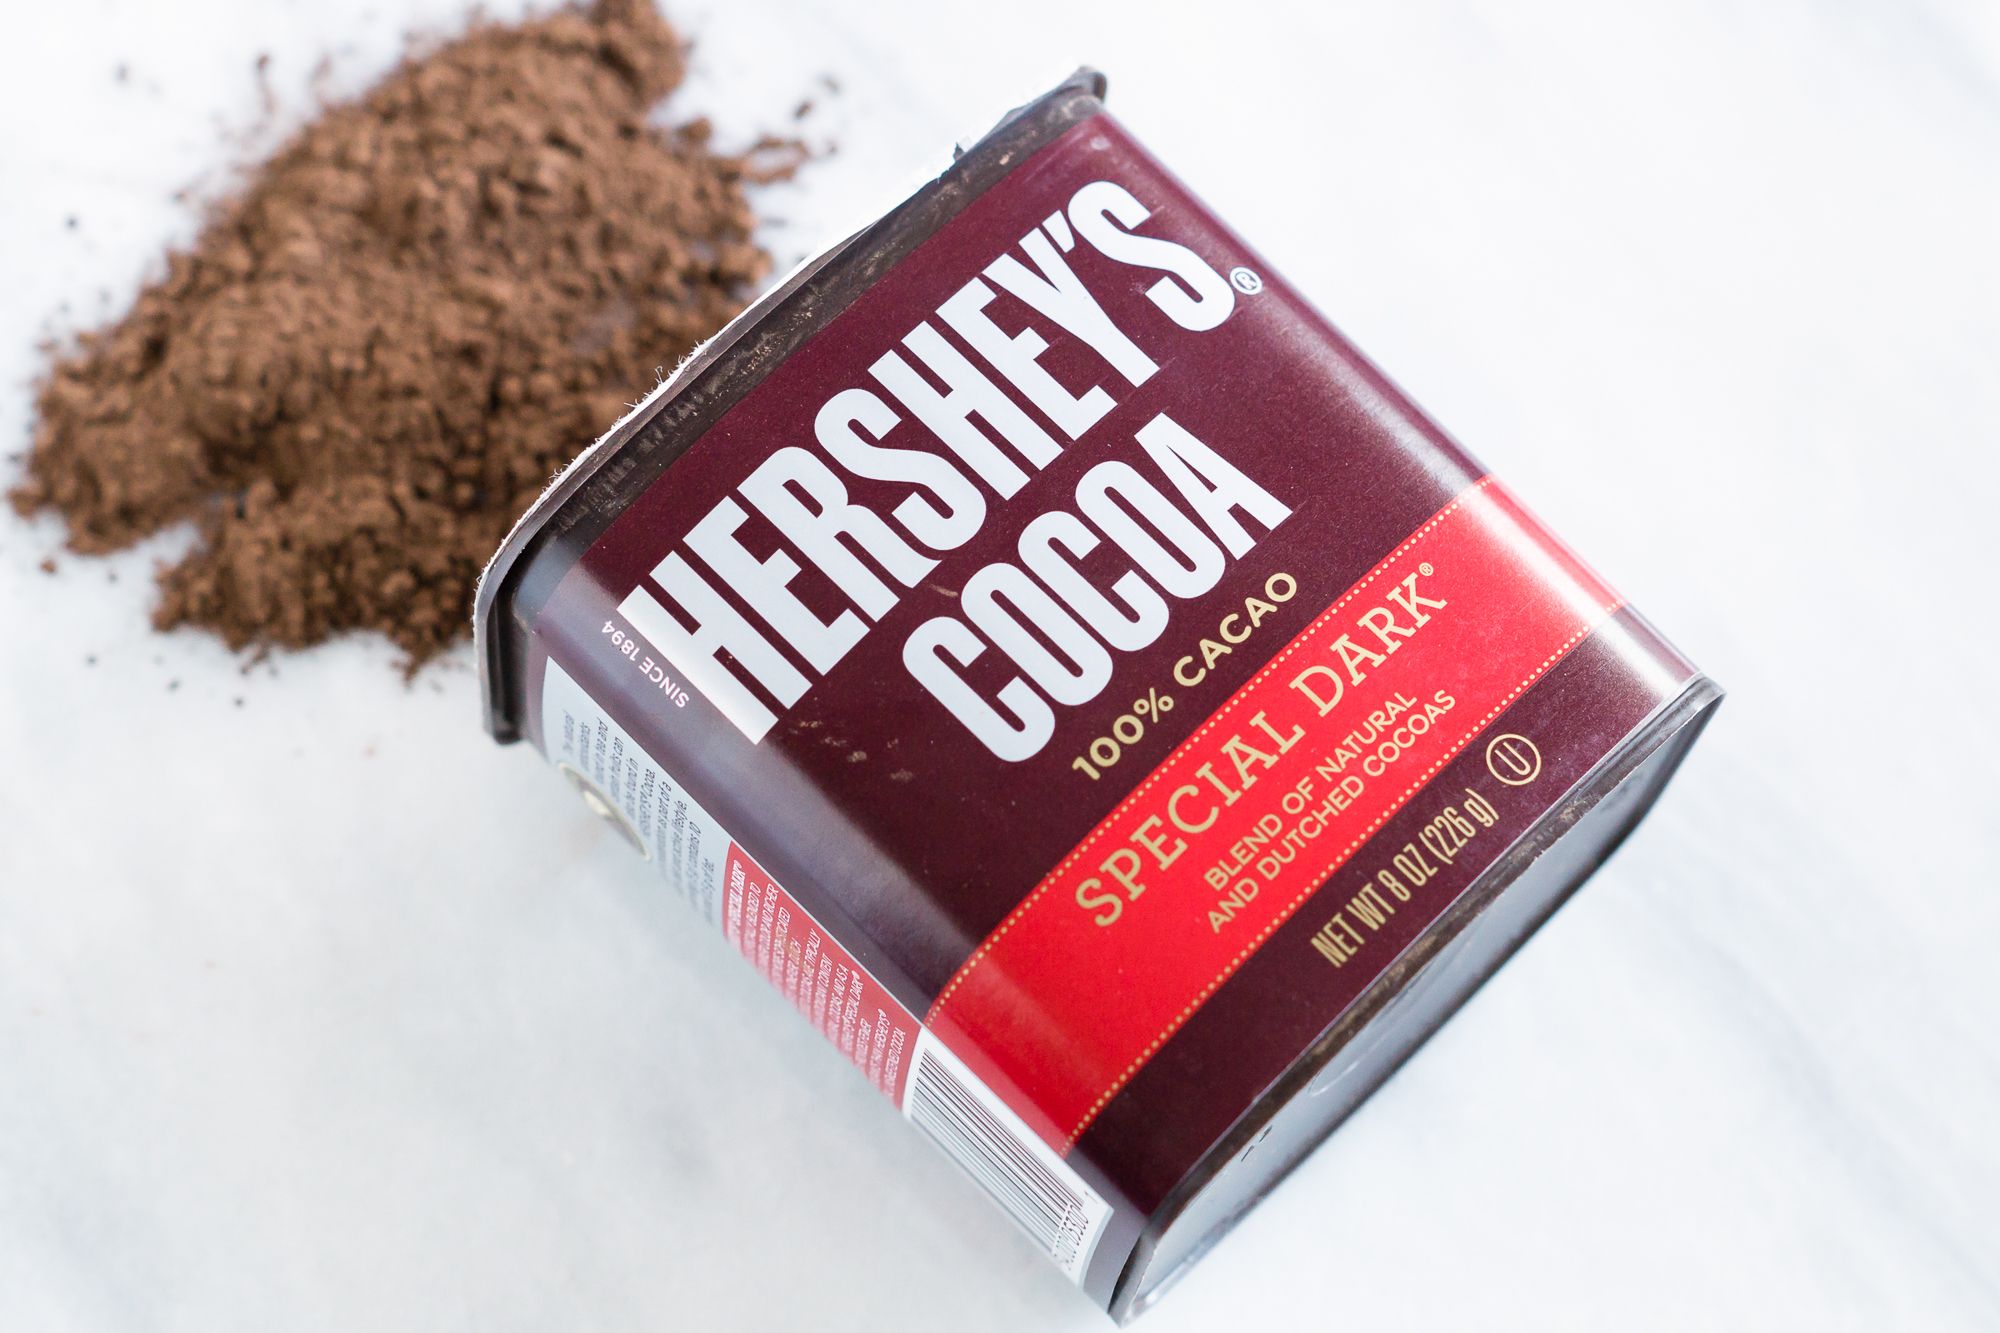 Is Hershey's Special Dark better than other dark chocolate bars or cocoa  powders? 